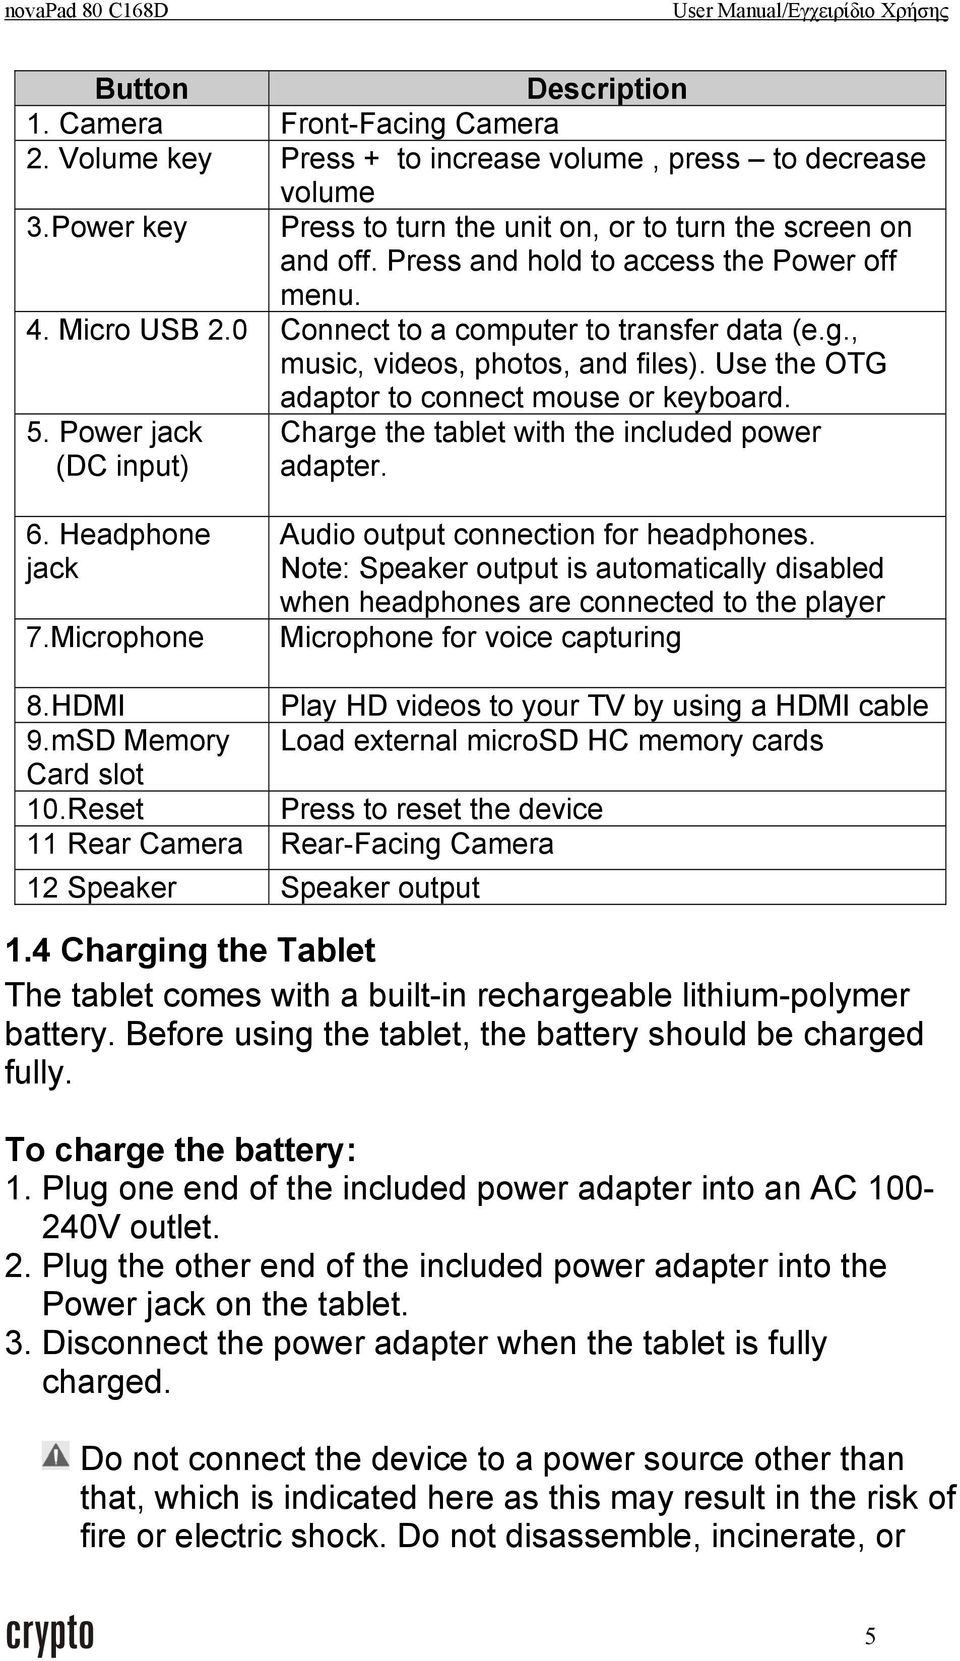 Power jack (DC input) adaptor to connect mouse or keyboard. Charge the tablet with the included power adapter. 6. Headphone jack 7.Microphone Audio output connection for headphones.